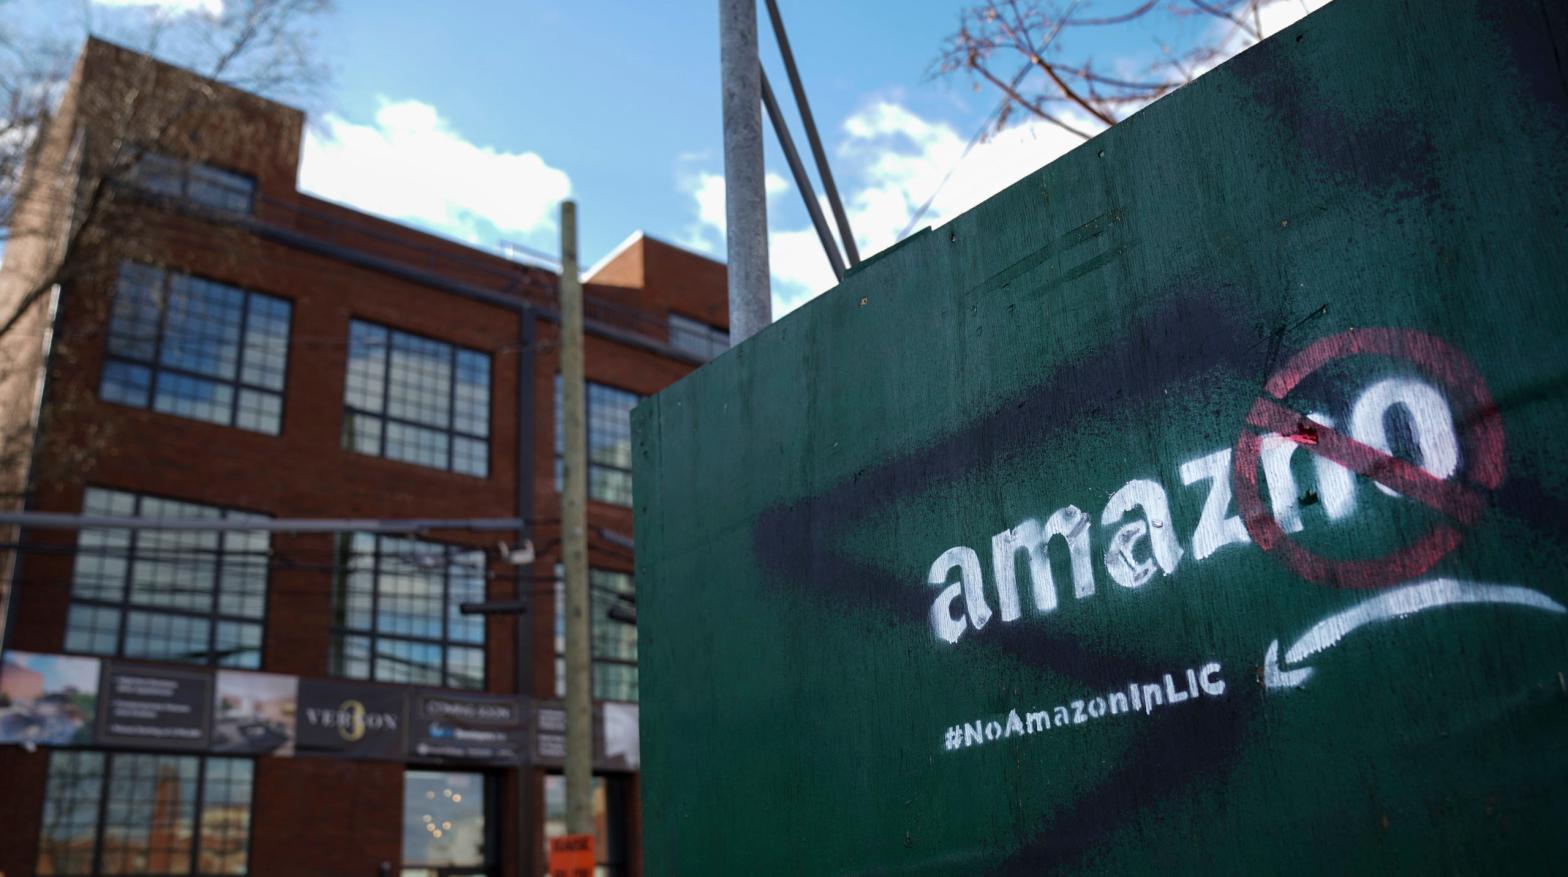 A protest message against Amazon's abandoned plans to open a headquarters building in Long Island City, Queens, in January 2019. (Photo: Drew Angerer, Getty Images)